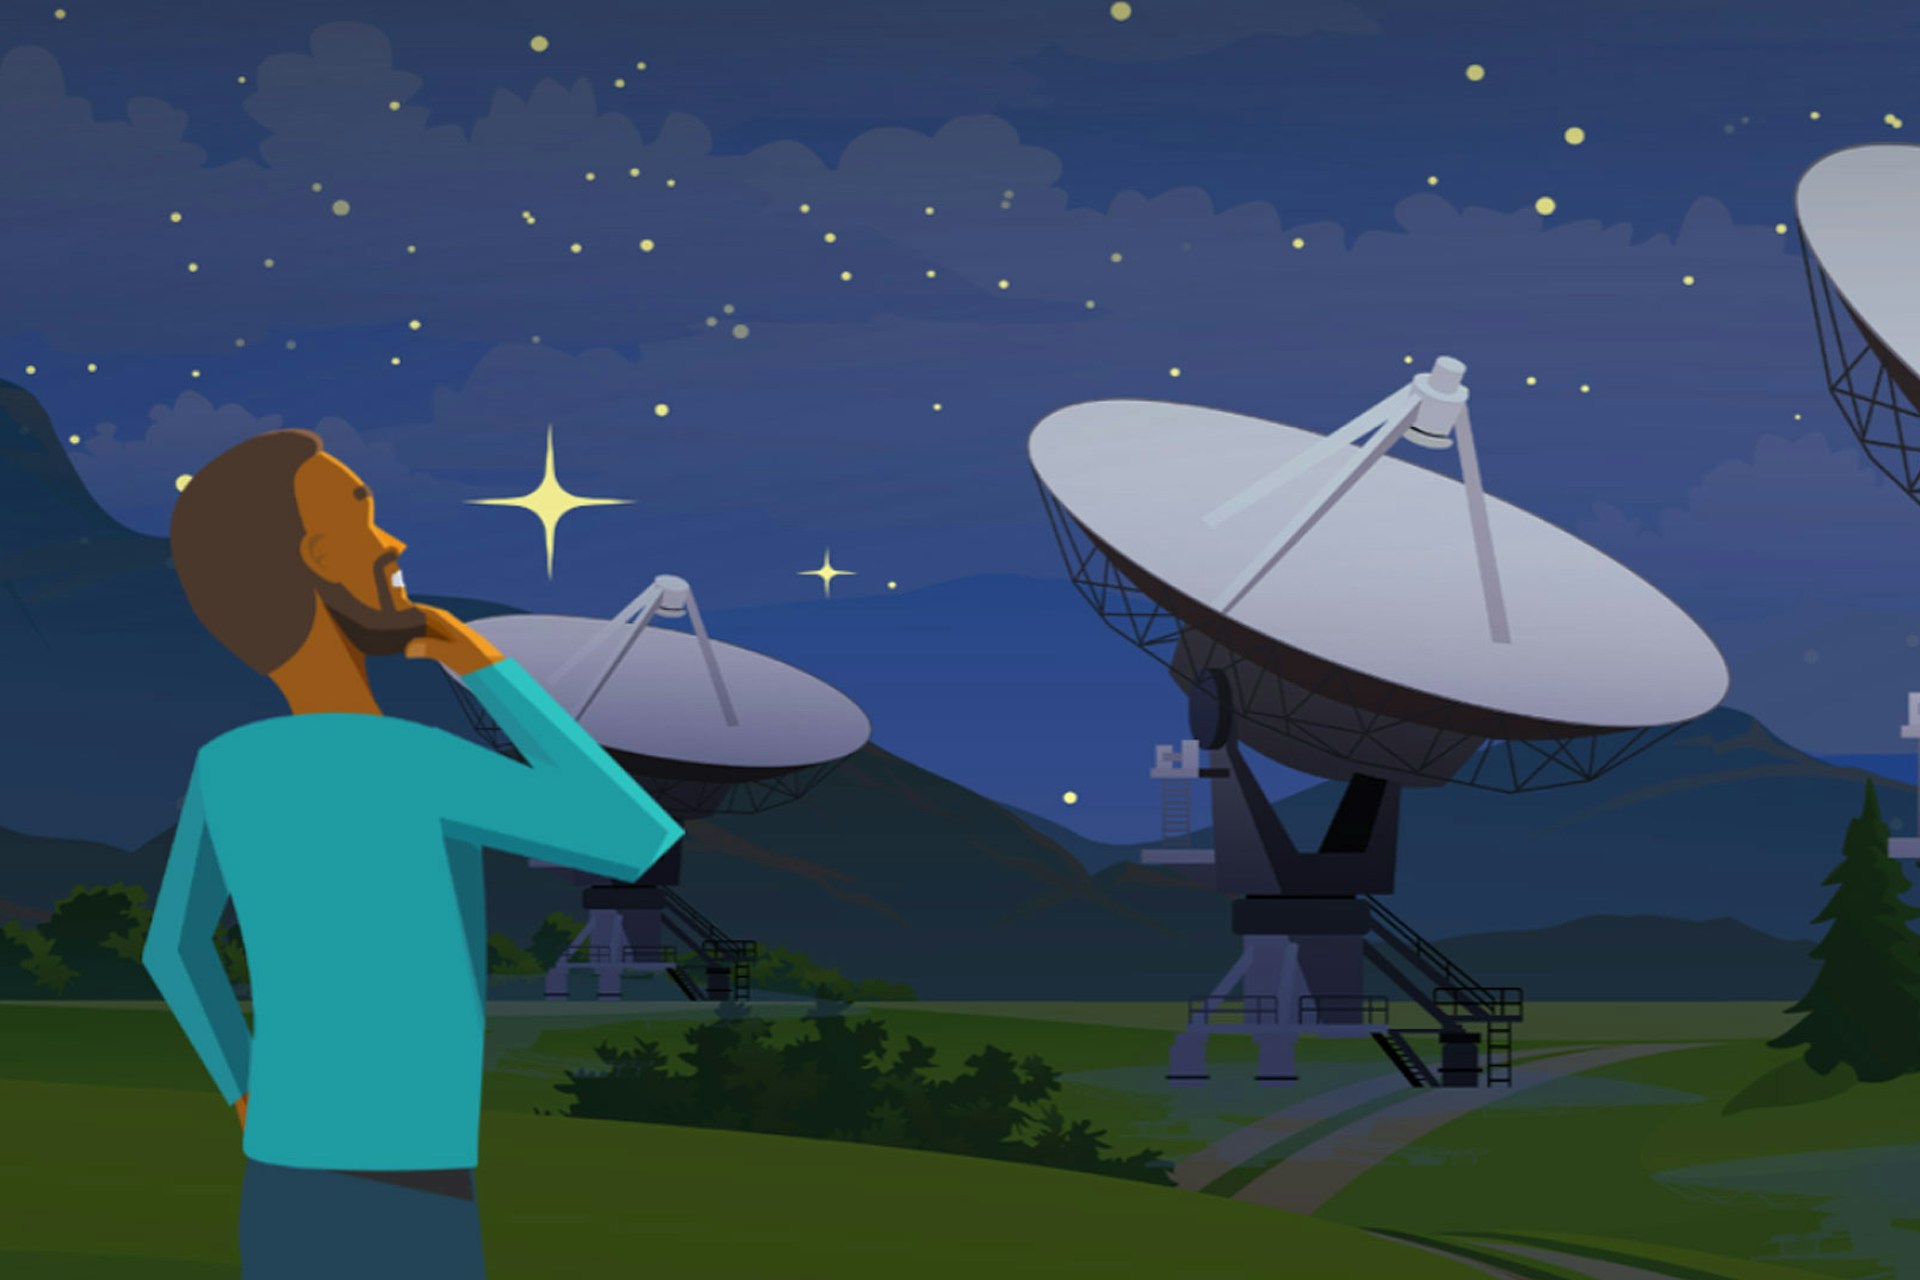 An illustration of a man looking up at a starry sky against a backdrop of satellite dishes